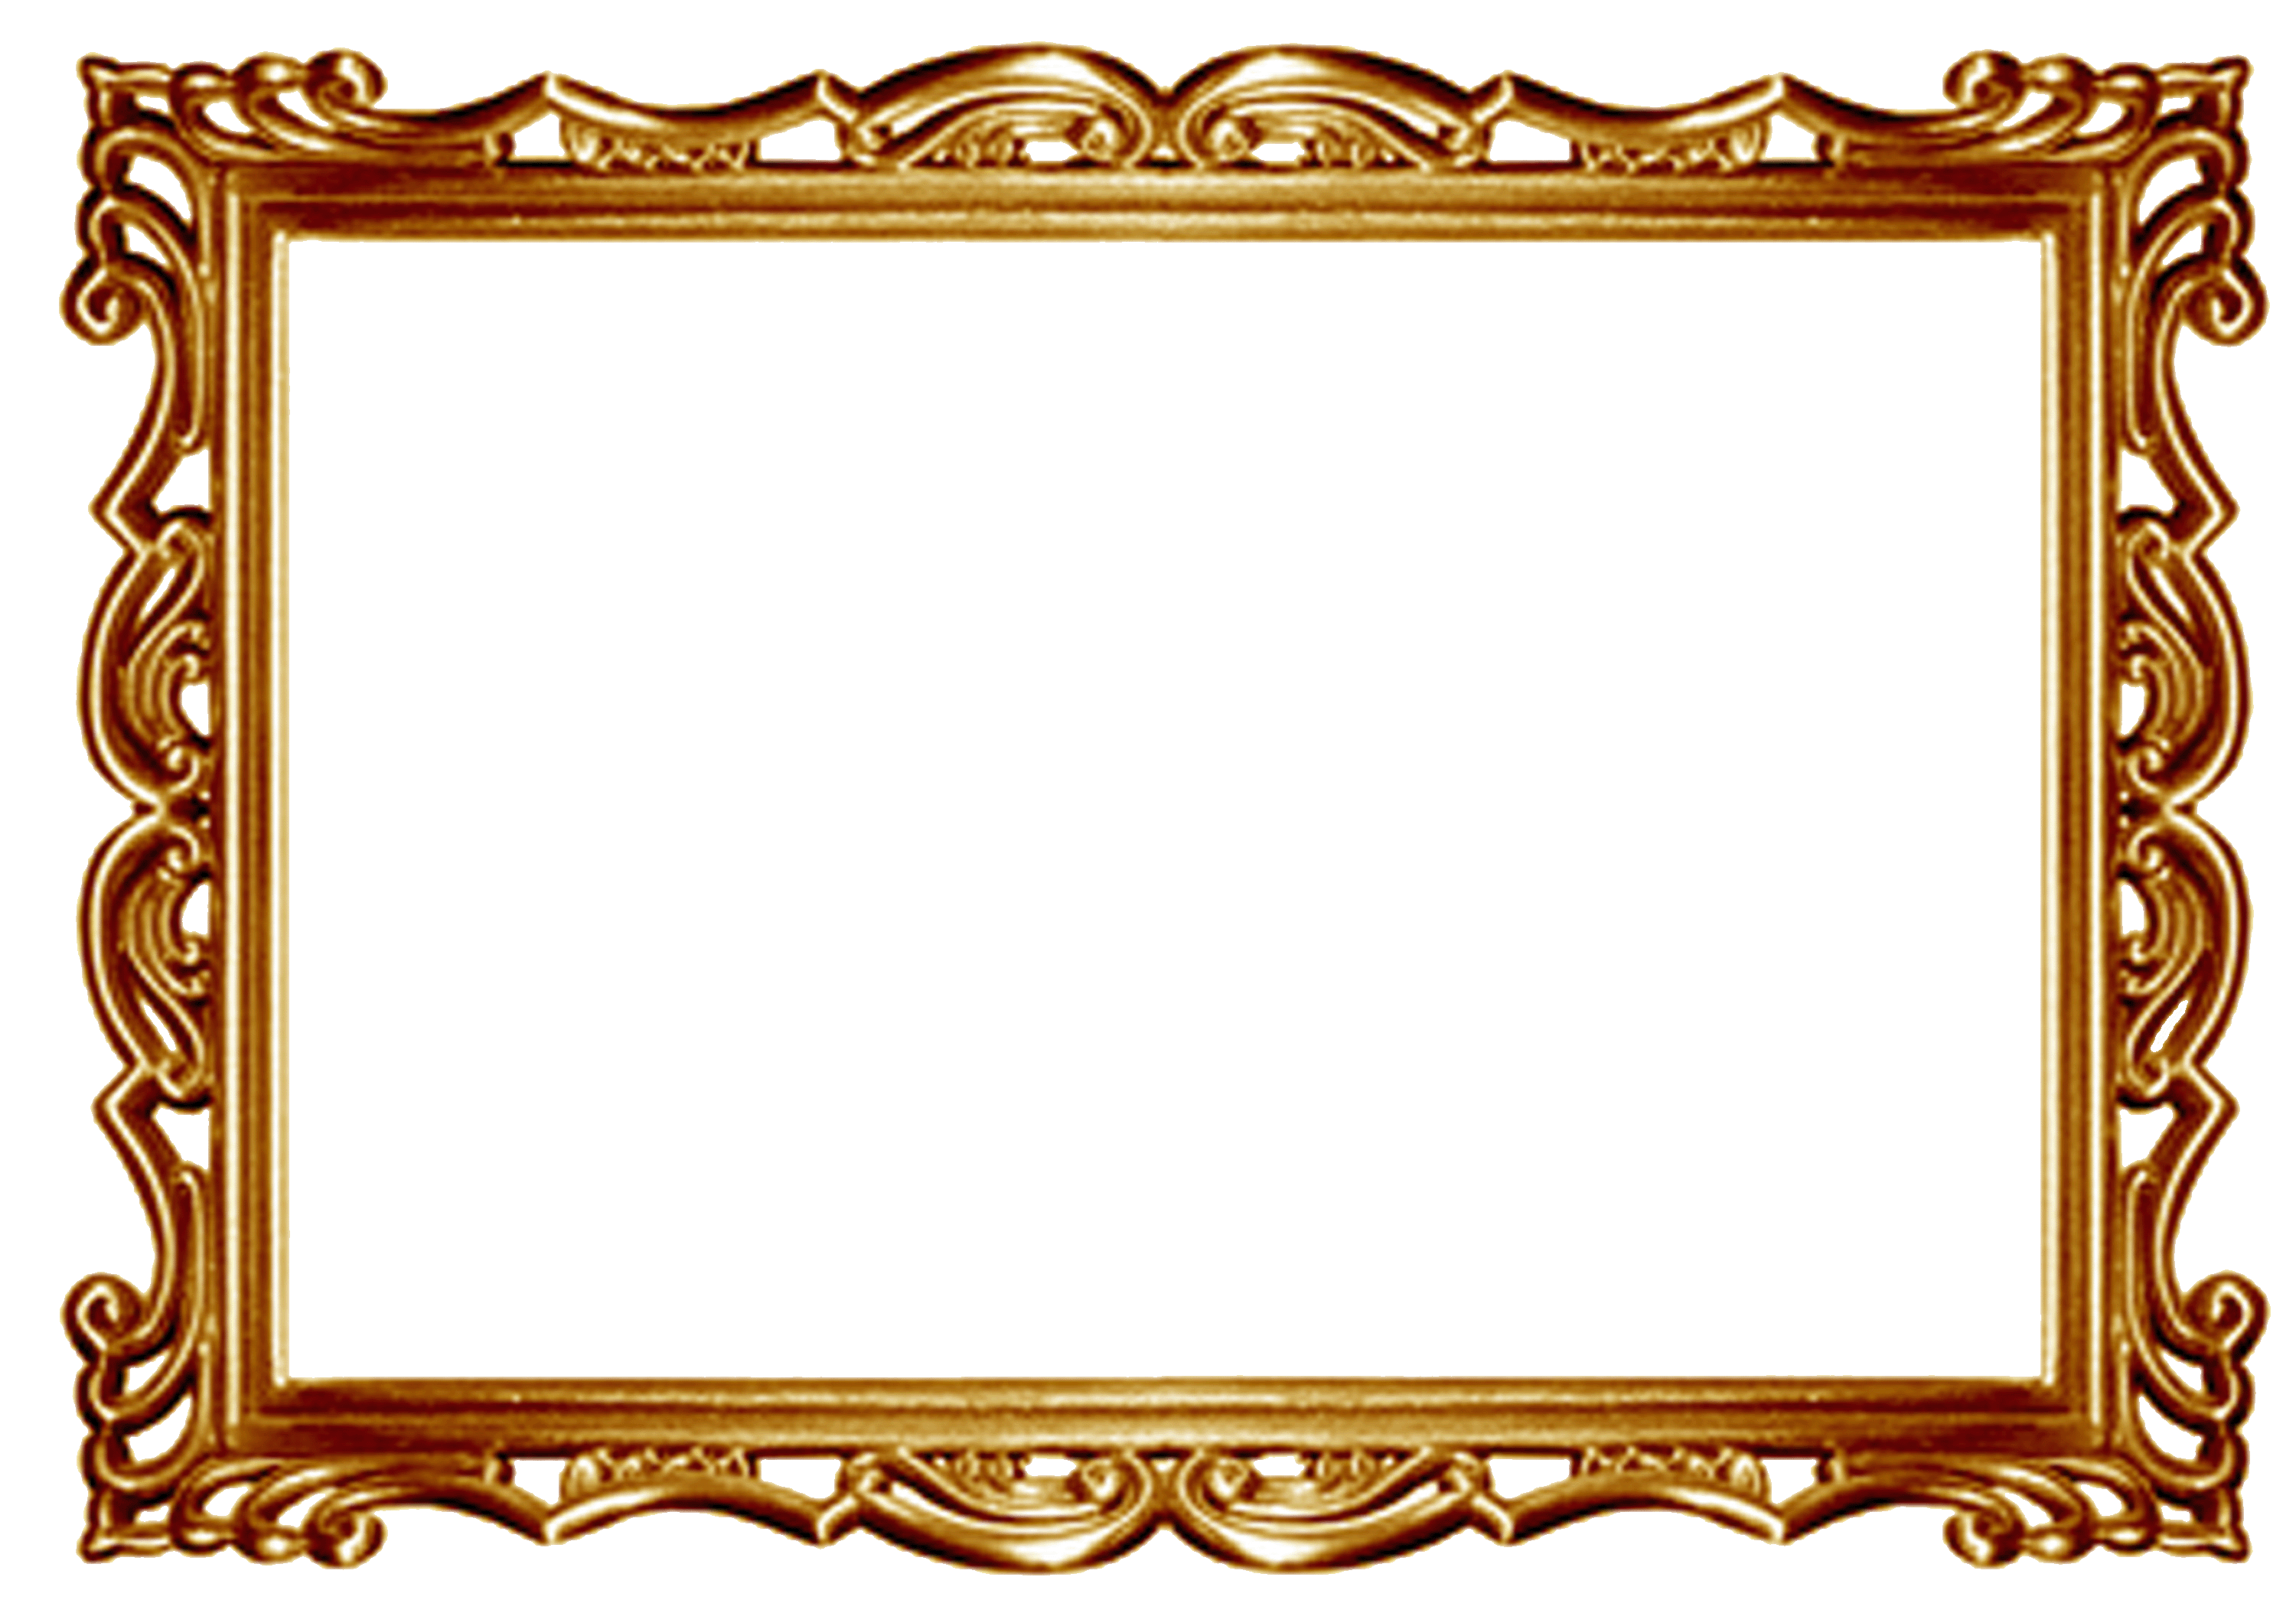 Gold Border Clipart | Free download on ClipArtMag